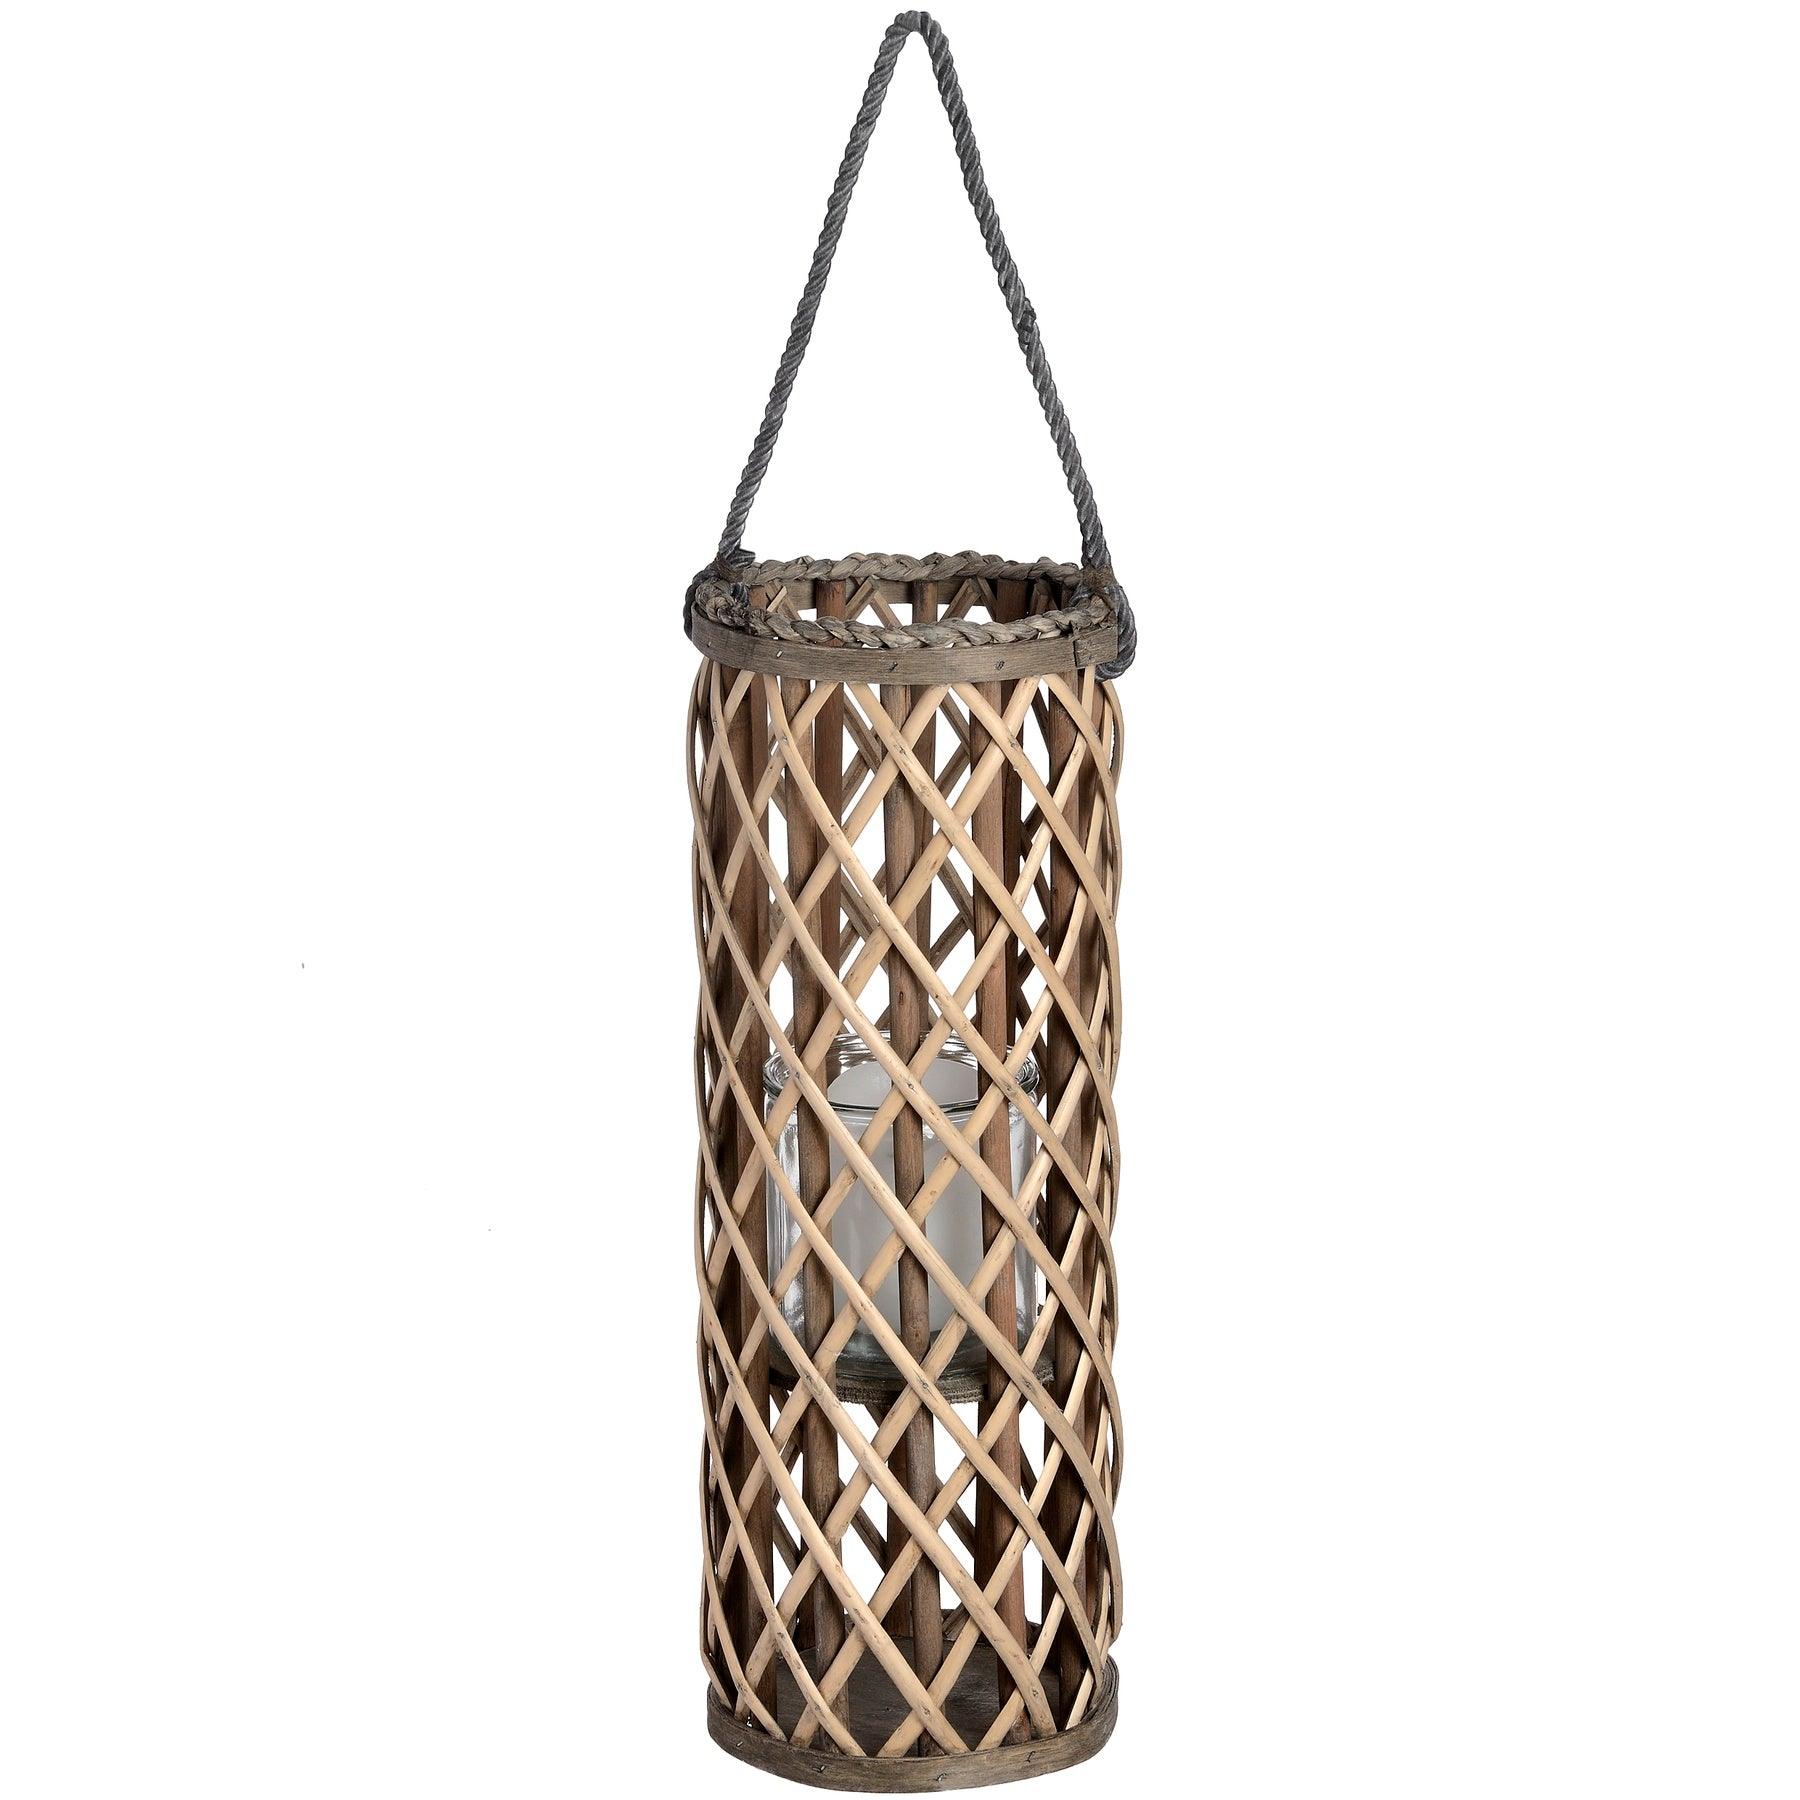 View Small Wicker Lantern with Glass Hurricane information